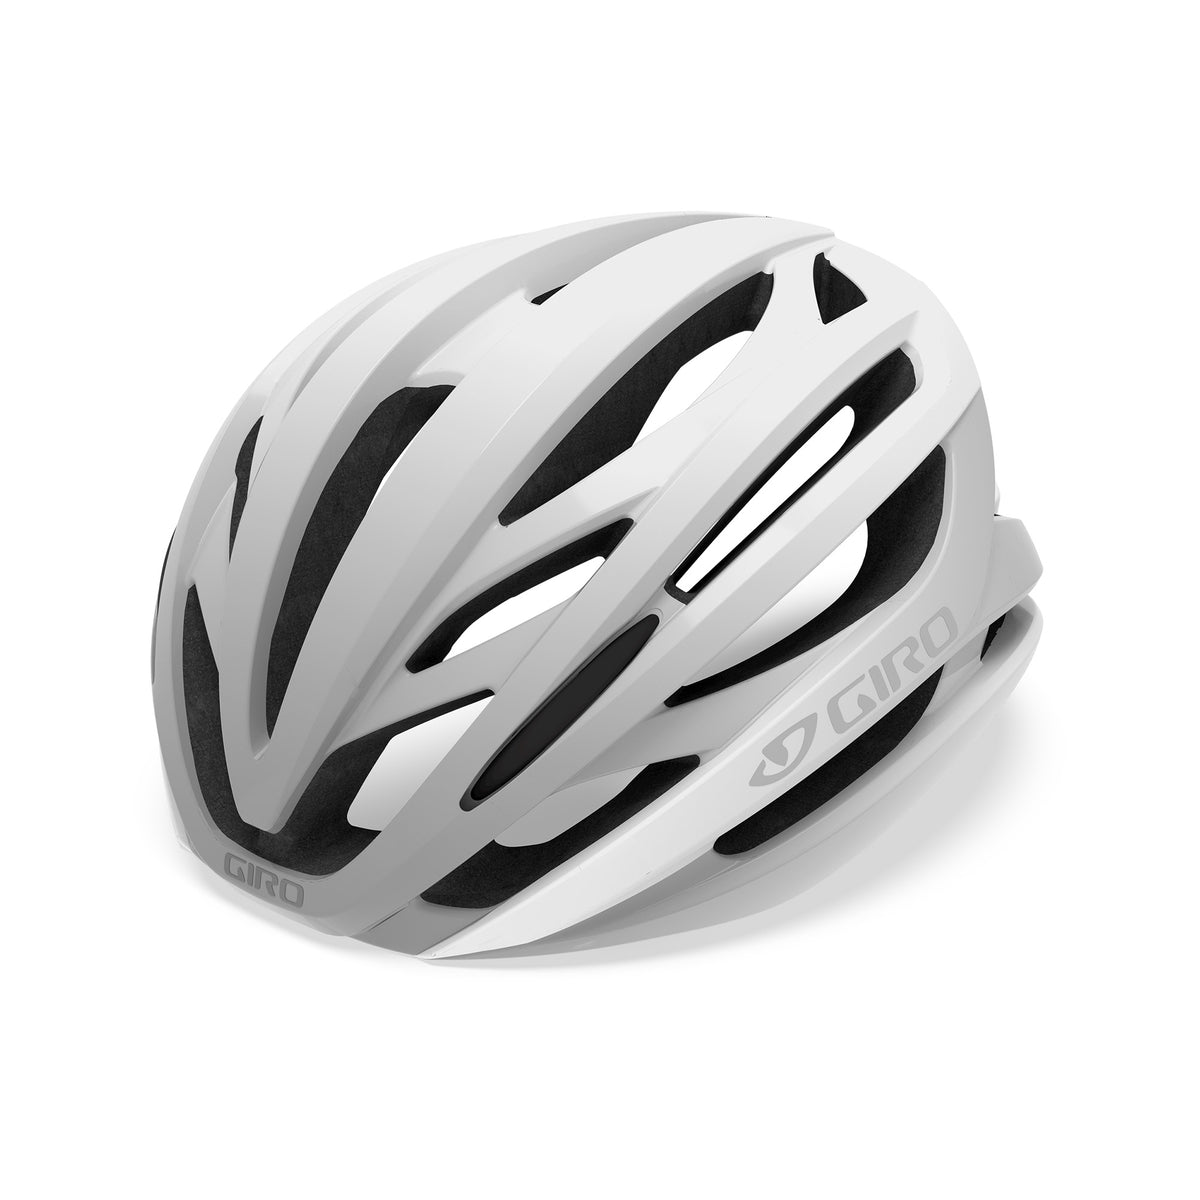 SYNTAX MIPS AF White – Cycling Shop ヤマネ - 高知の自転車専門店